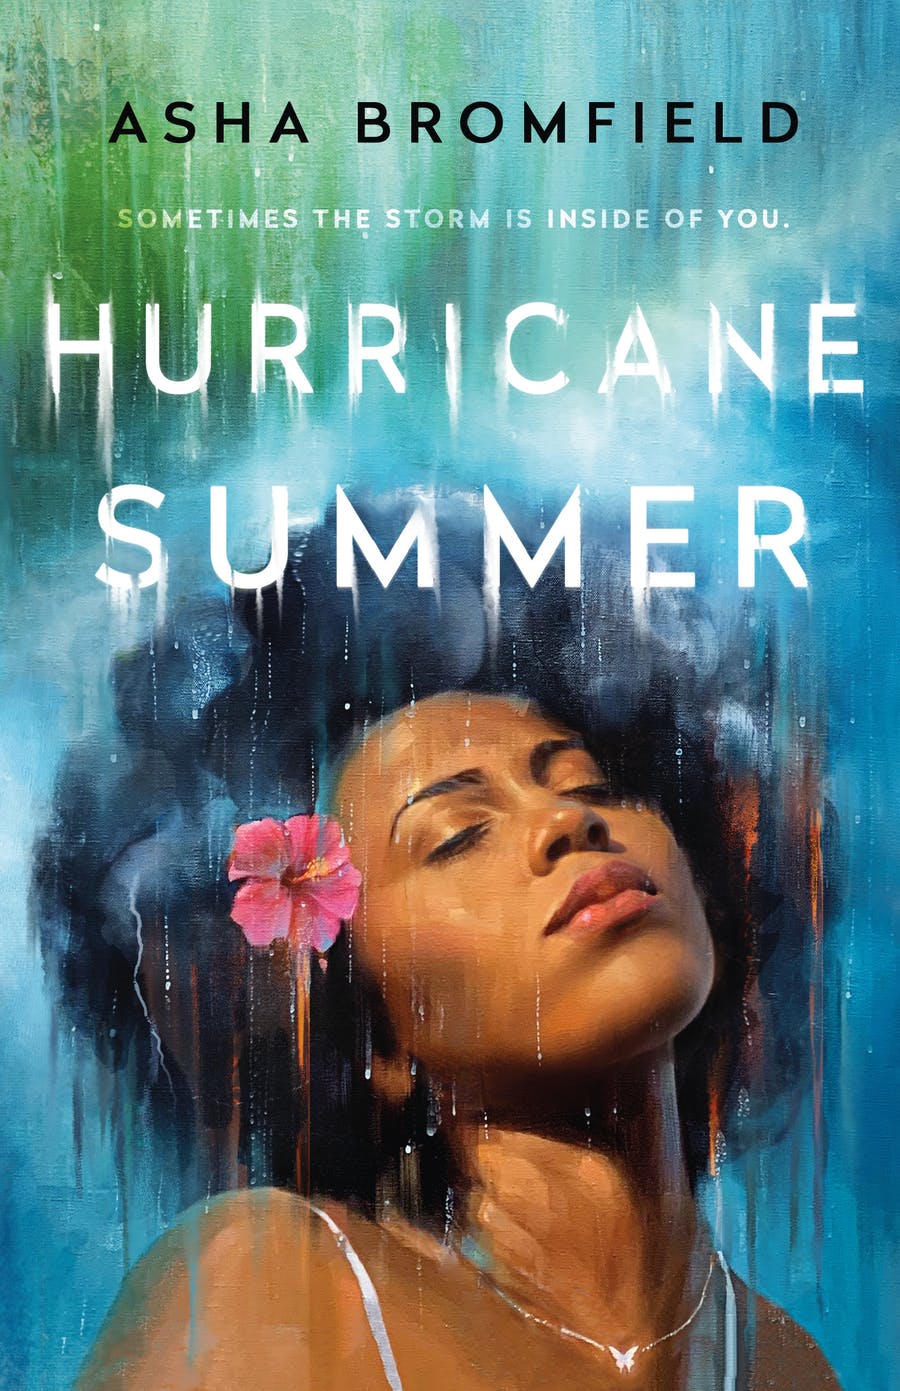 Cover image for Asha Bromfield's novel HURRICANE SUMMER. showing a young Black woman with a dark curly Afro closing her eyes and lifting her face to the sky. A pink flower is tucked into the hair behind her right ear.